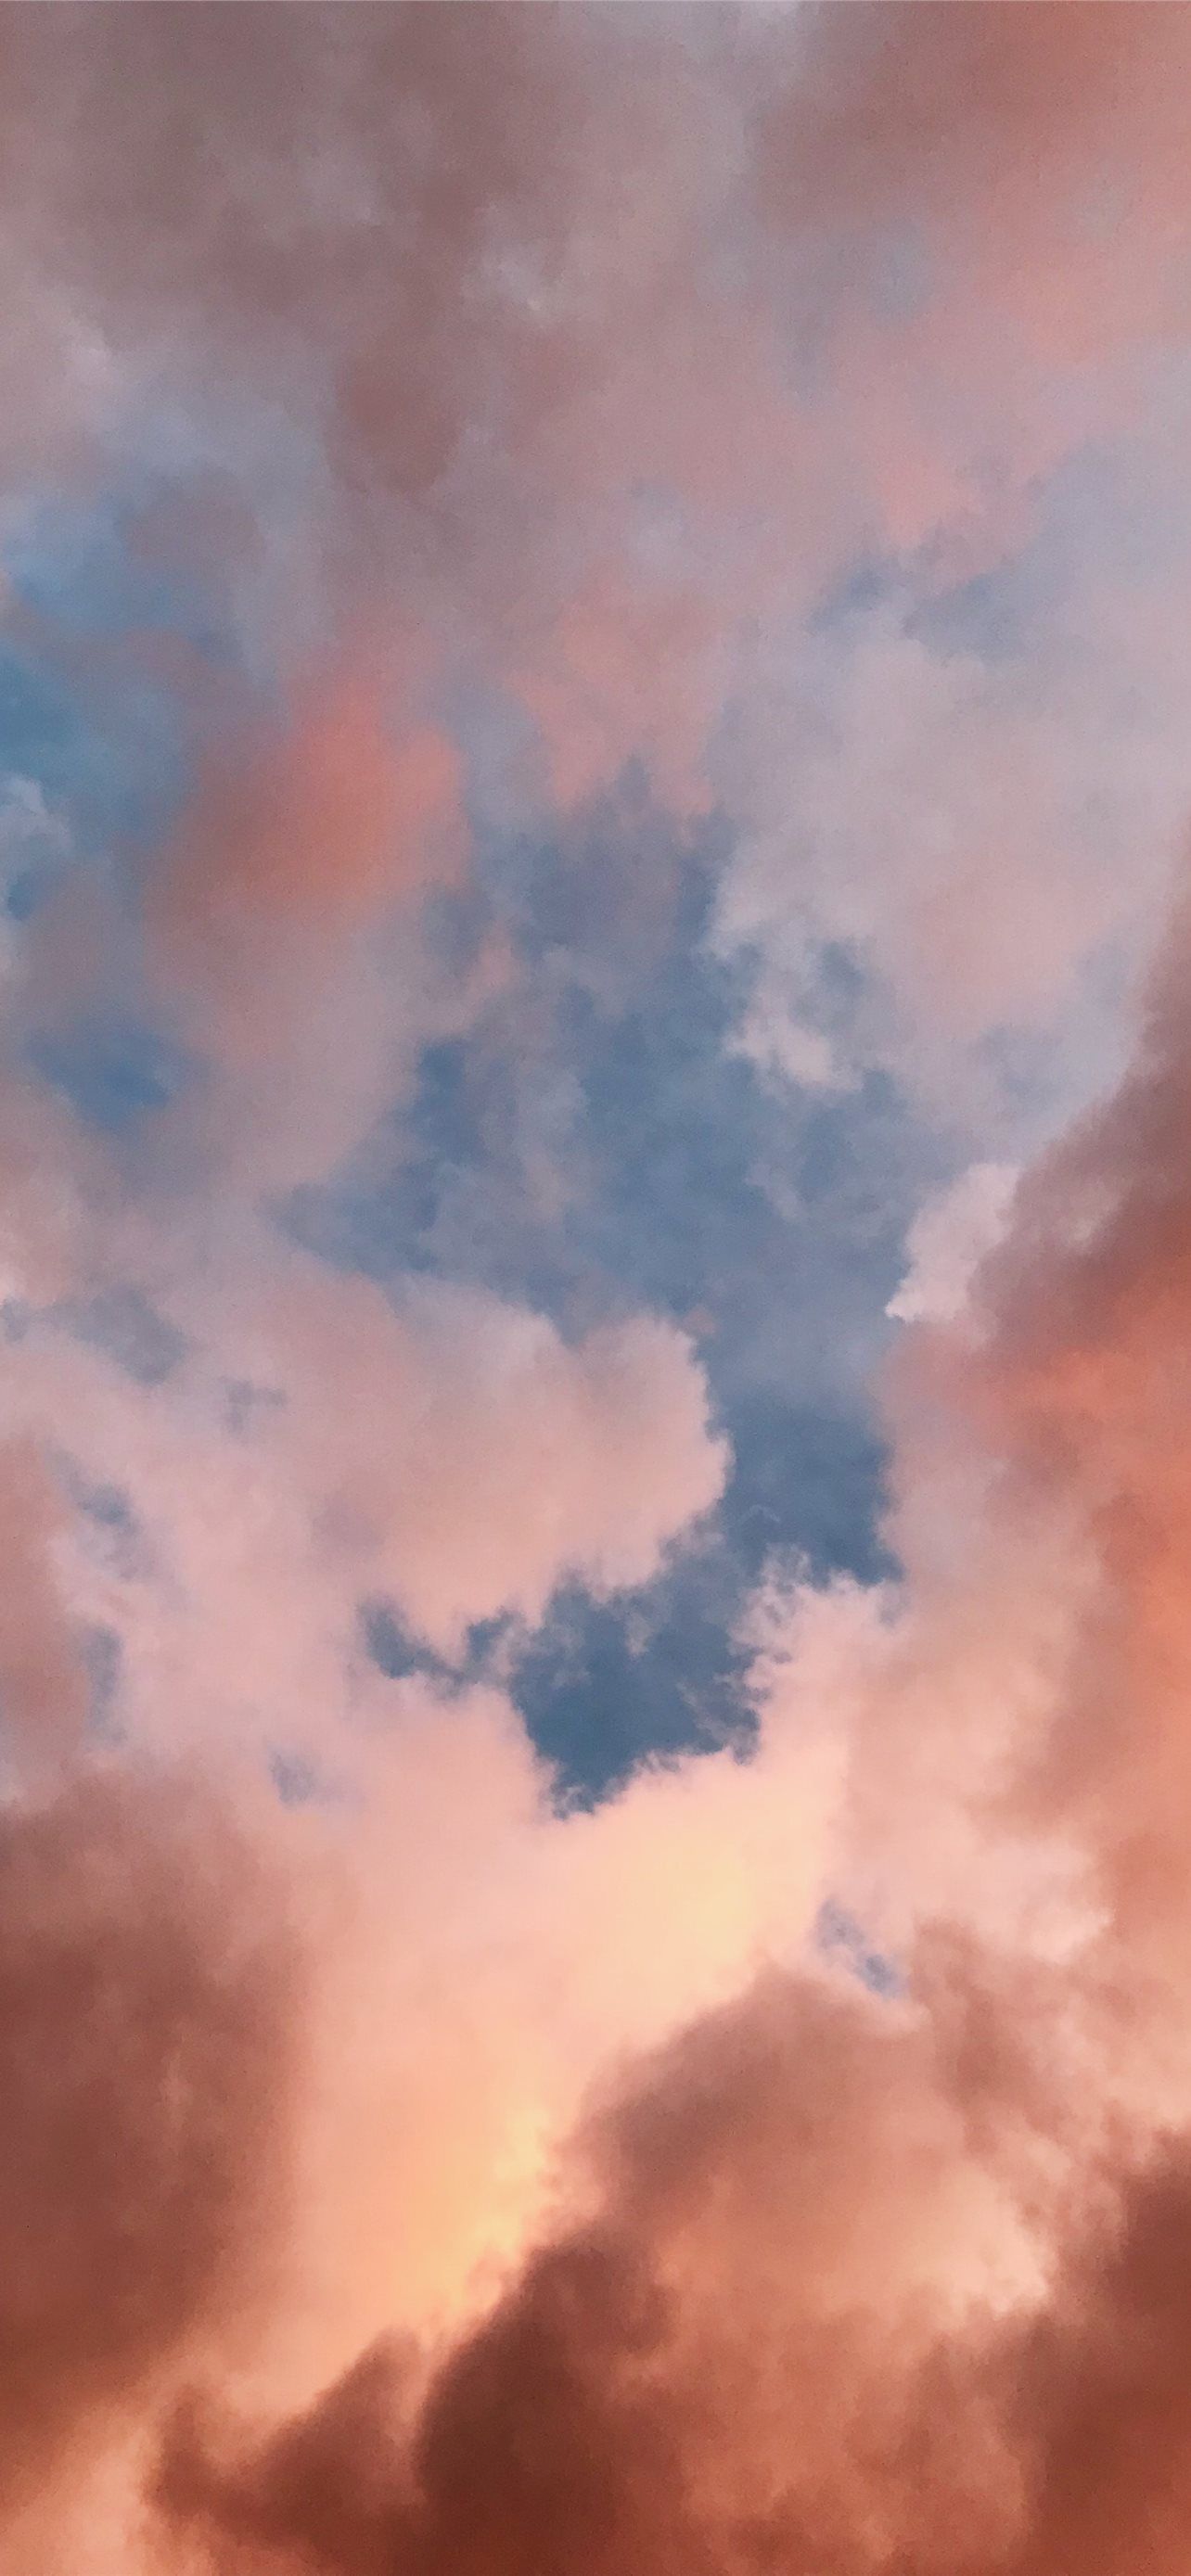 white clouds during golden hour iPhone Wallpaper Free Download